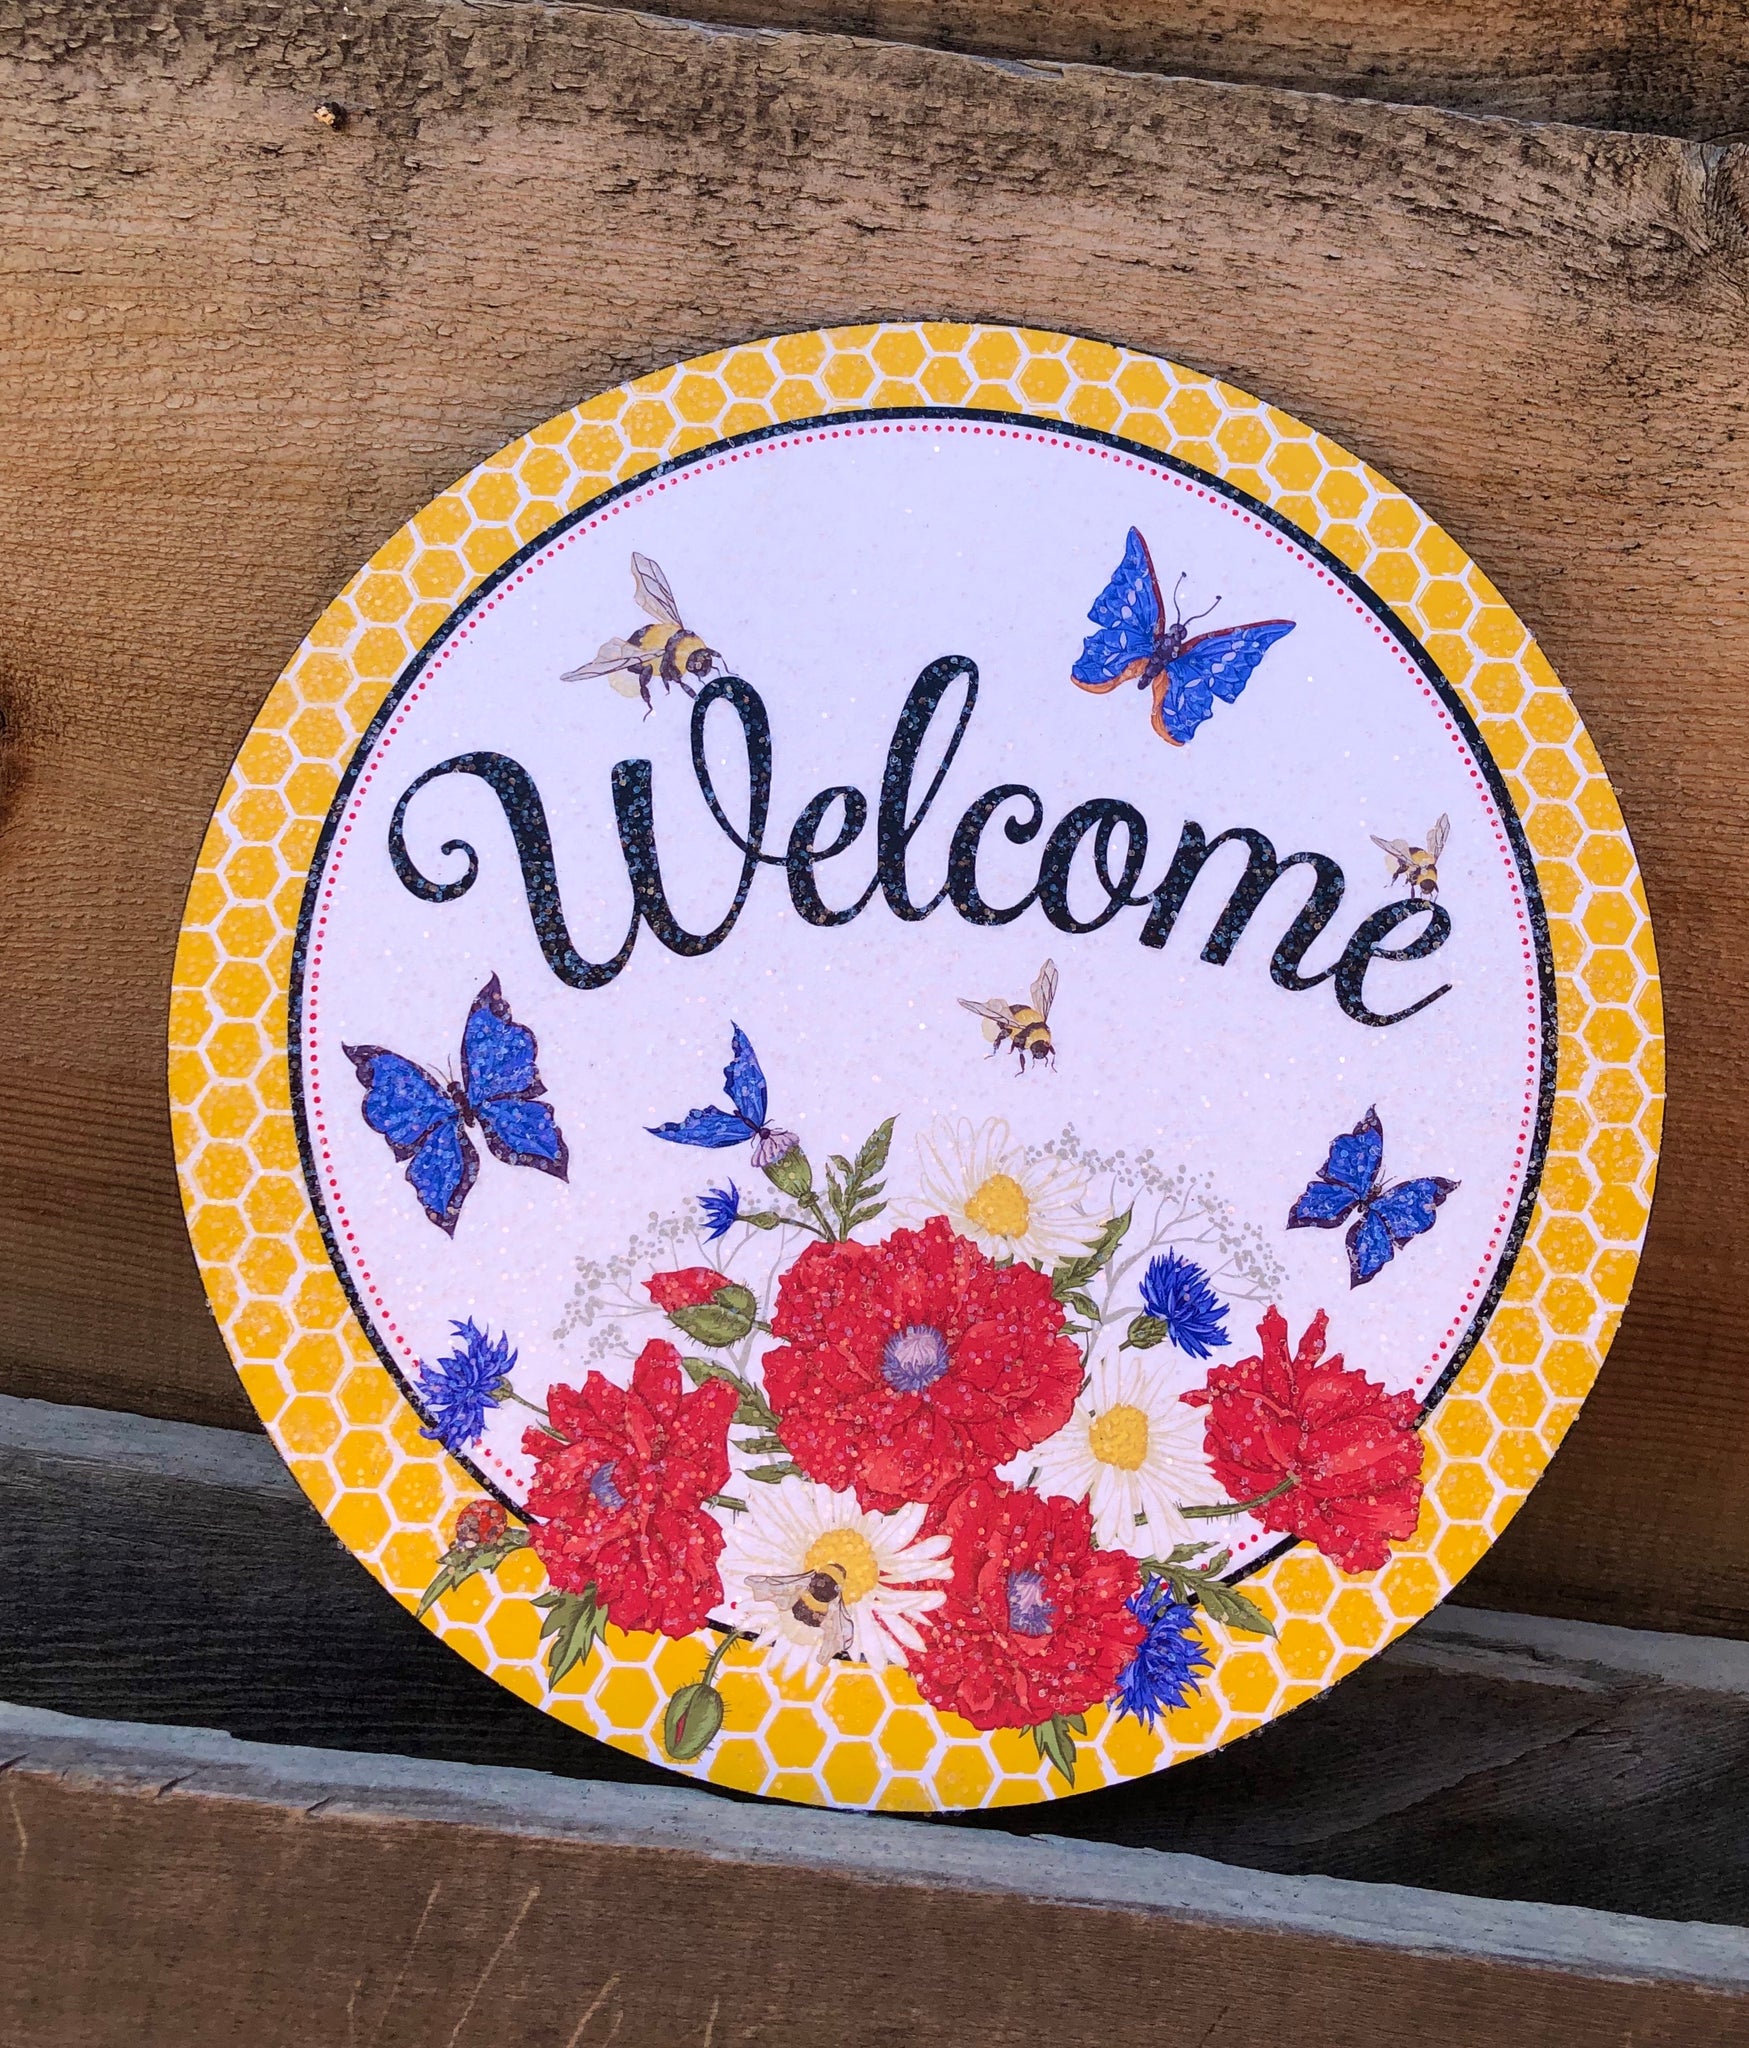 Welcome Poppy round sign.